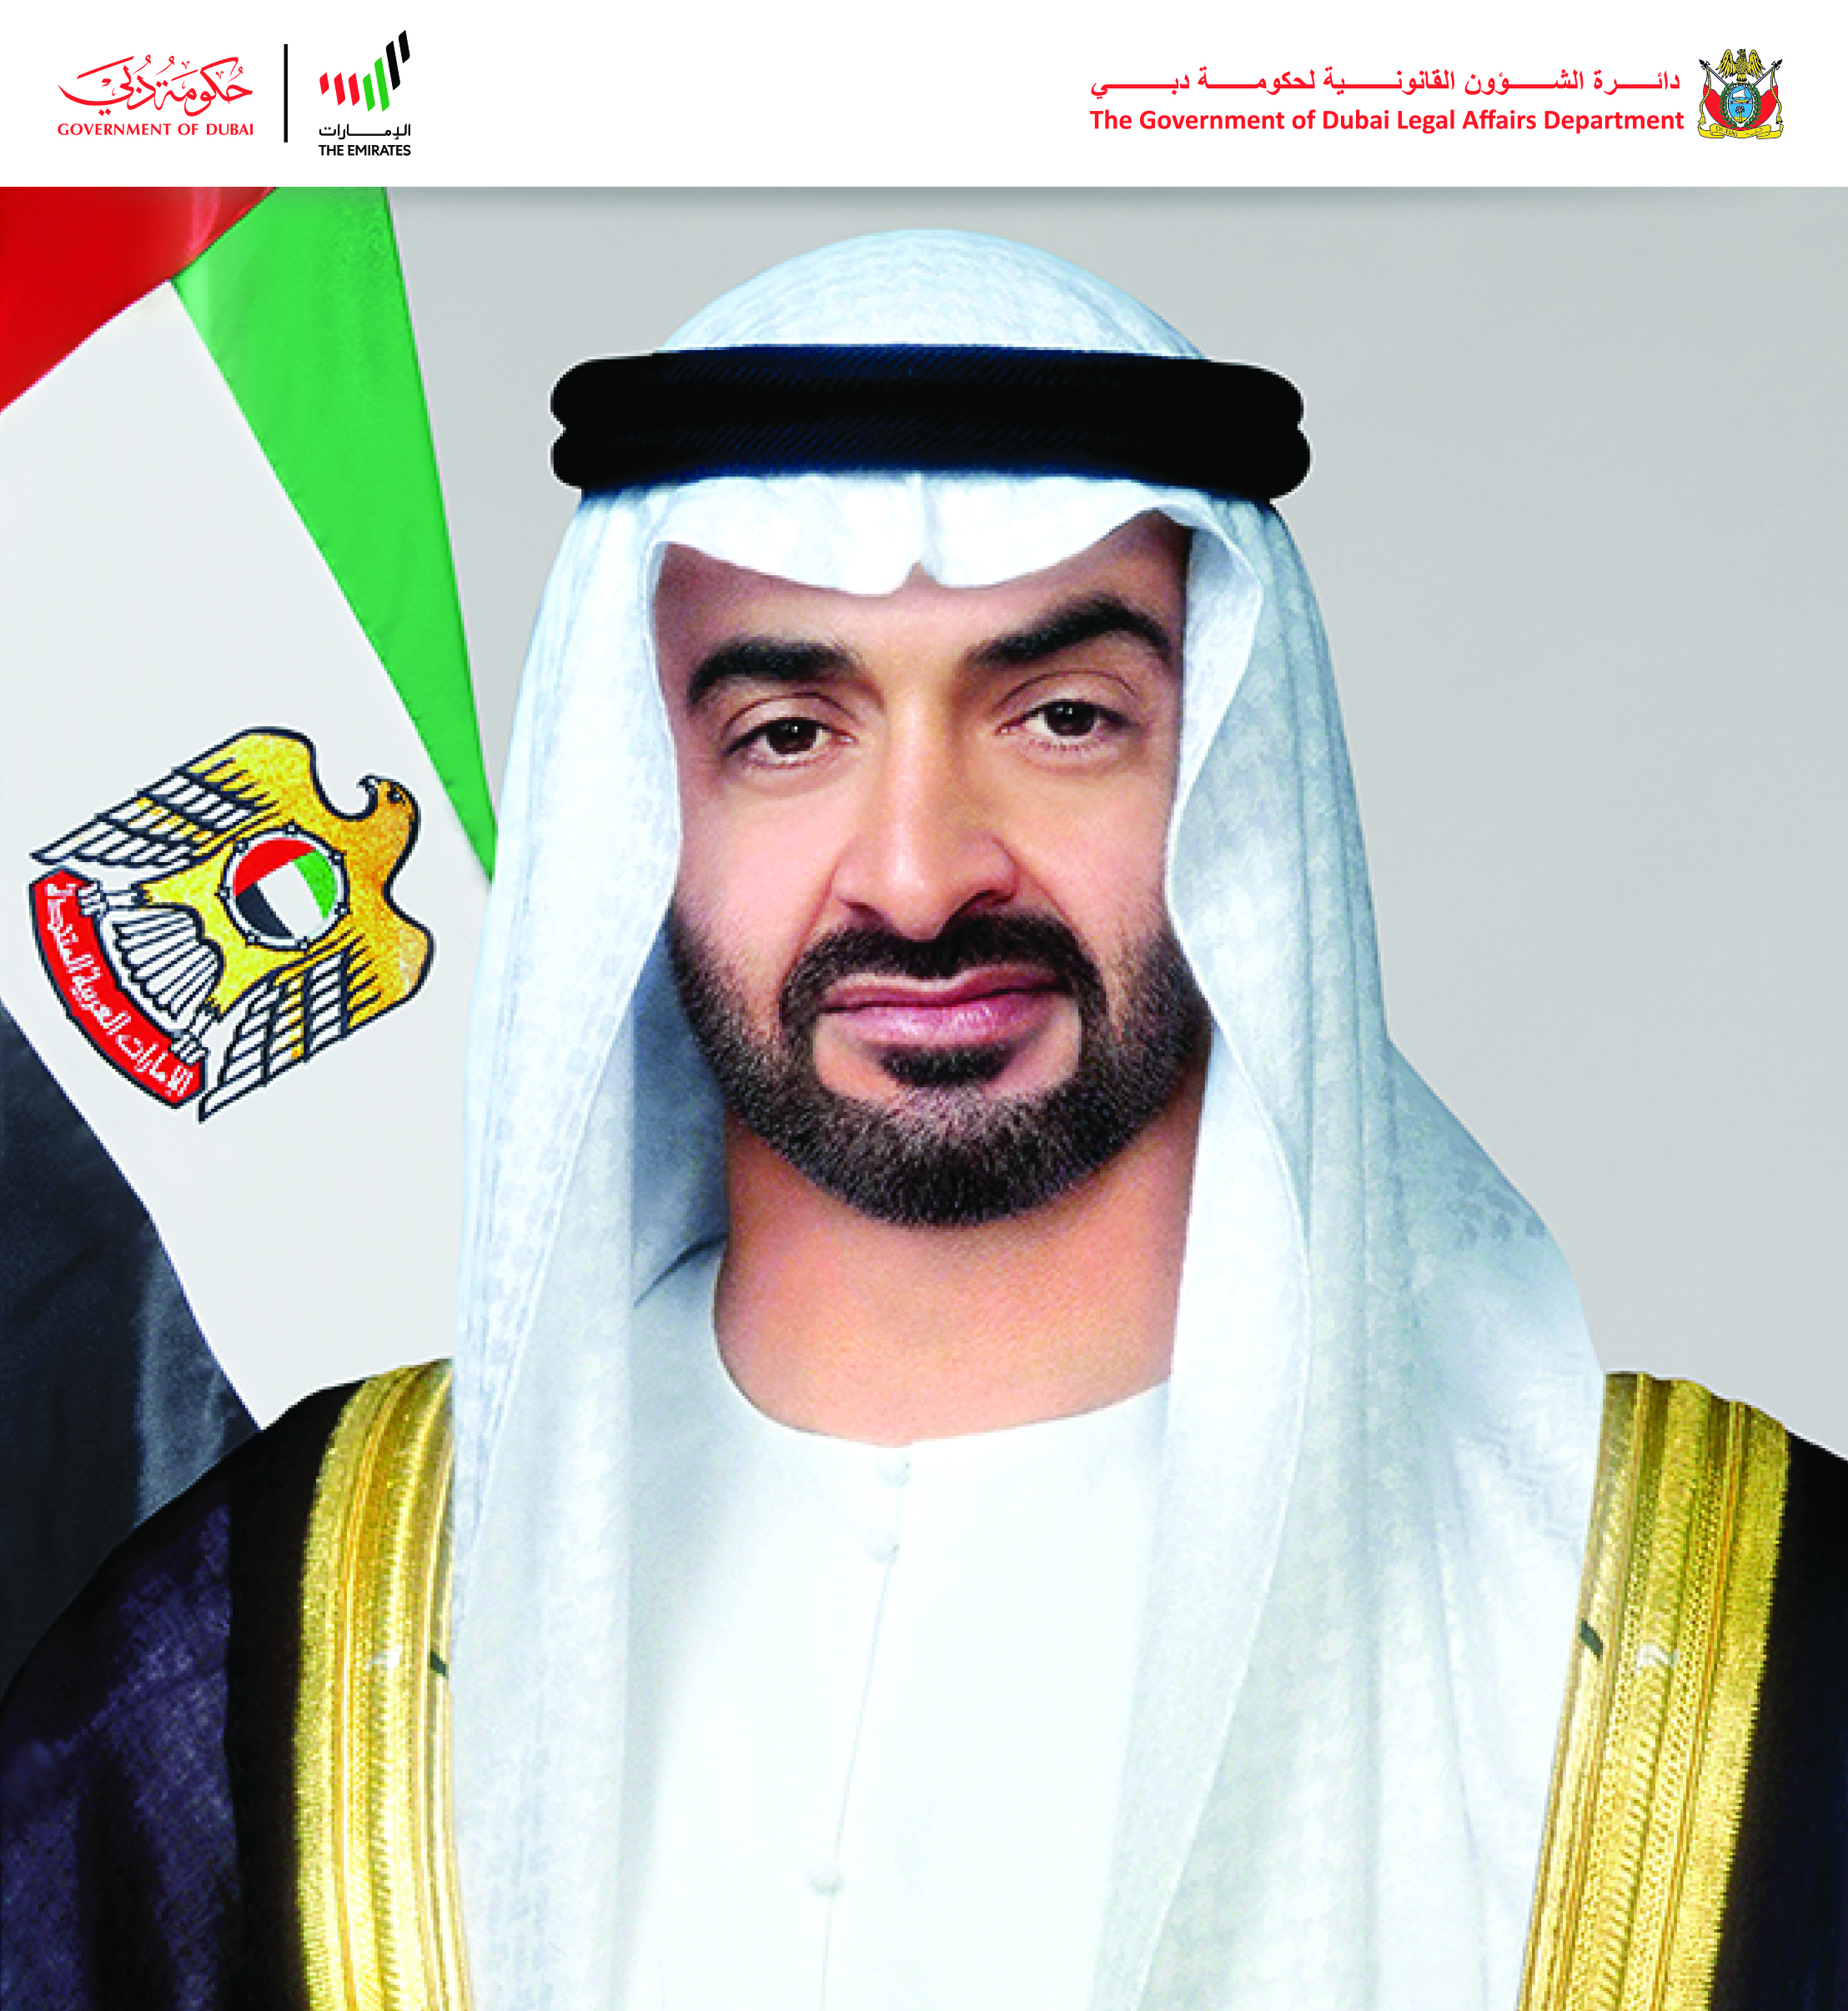 Statement of His Excellency the Director General of the Government of Dubai Legal Affairs Department on the Occasion of the New Resolutions and Decrees issued by His Highness President of the UAE